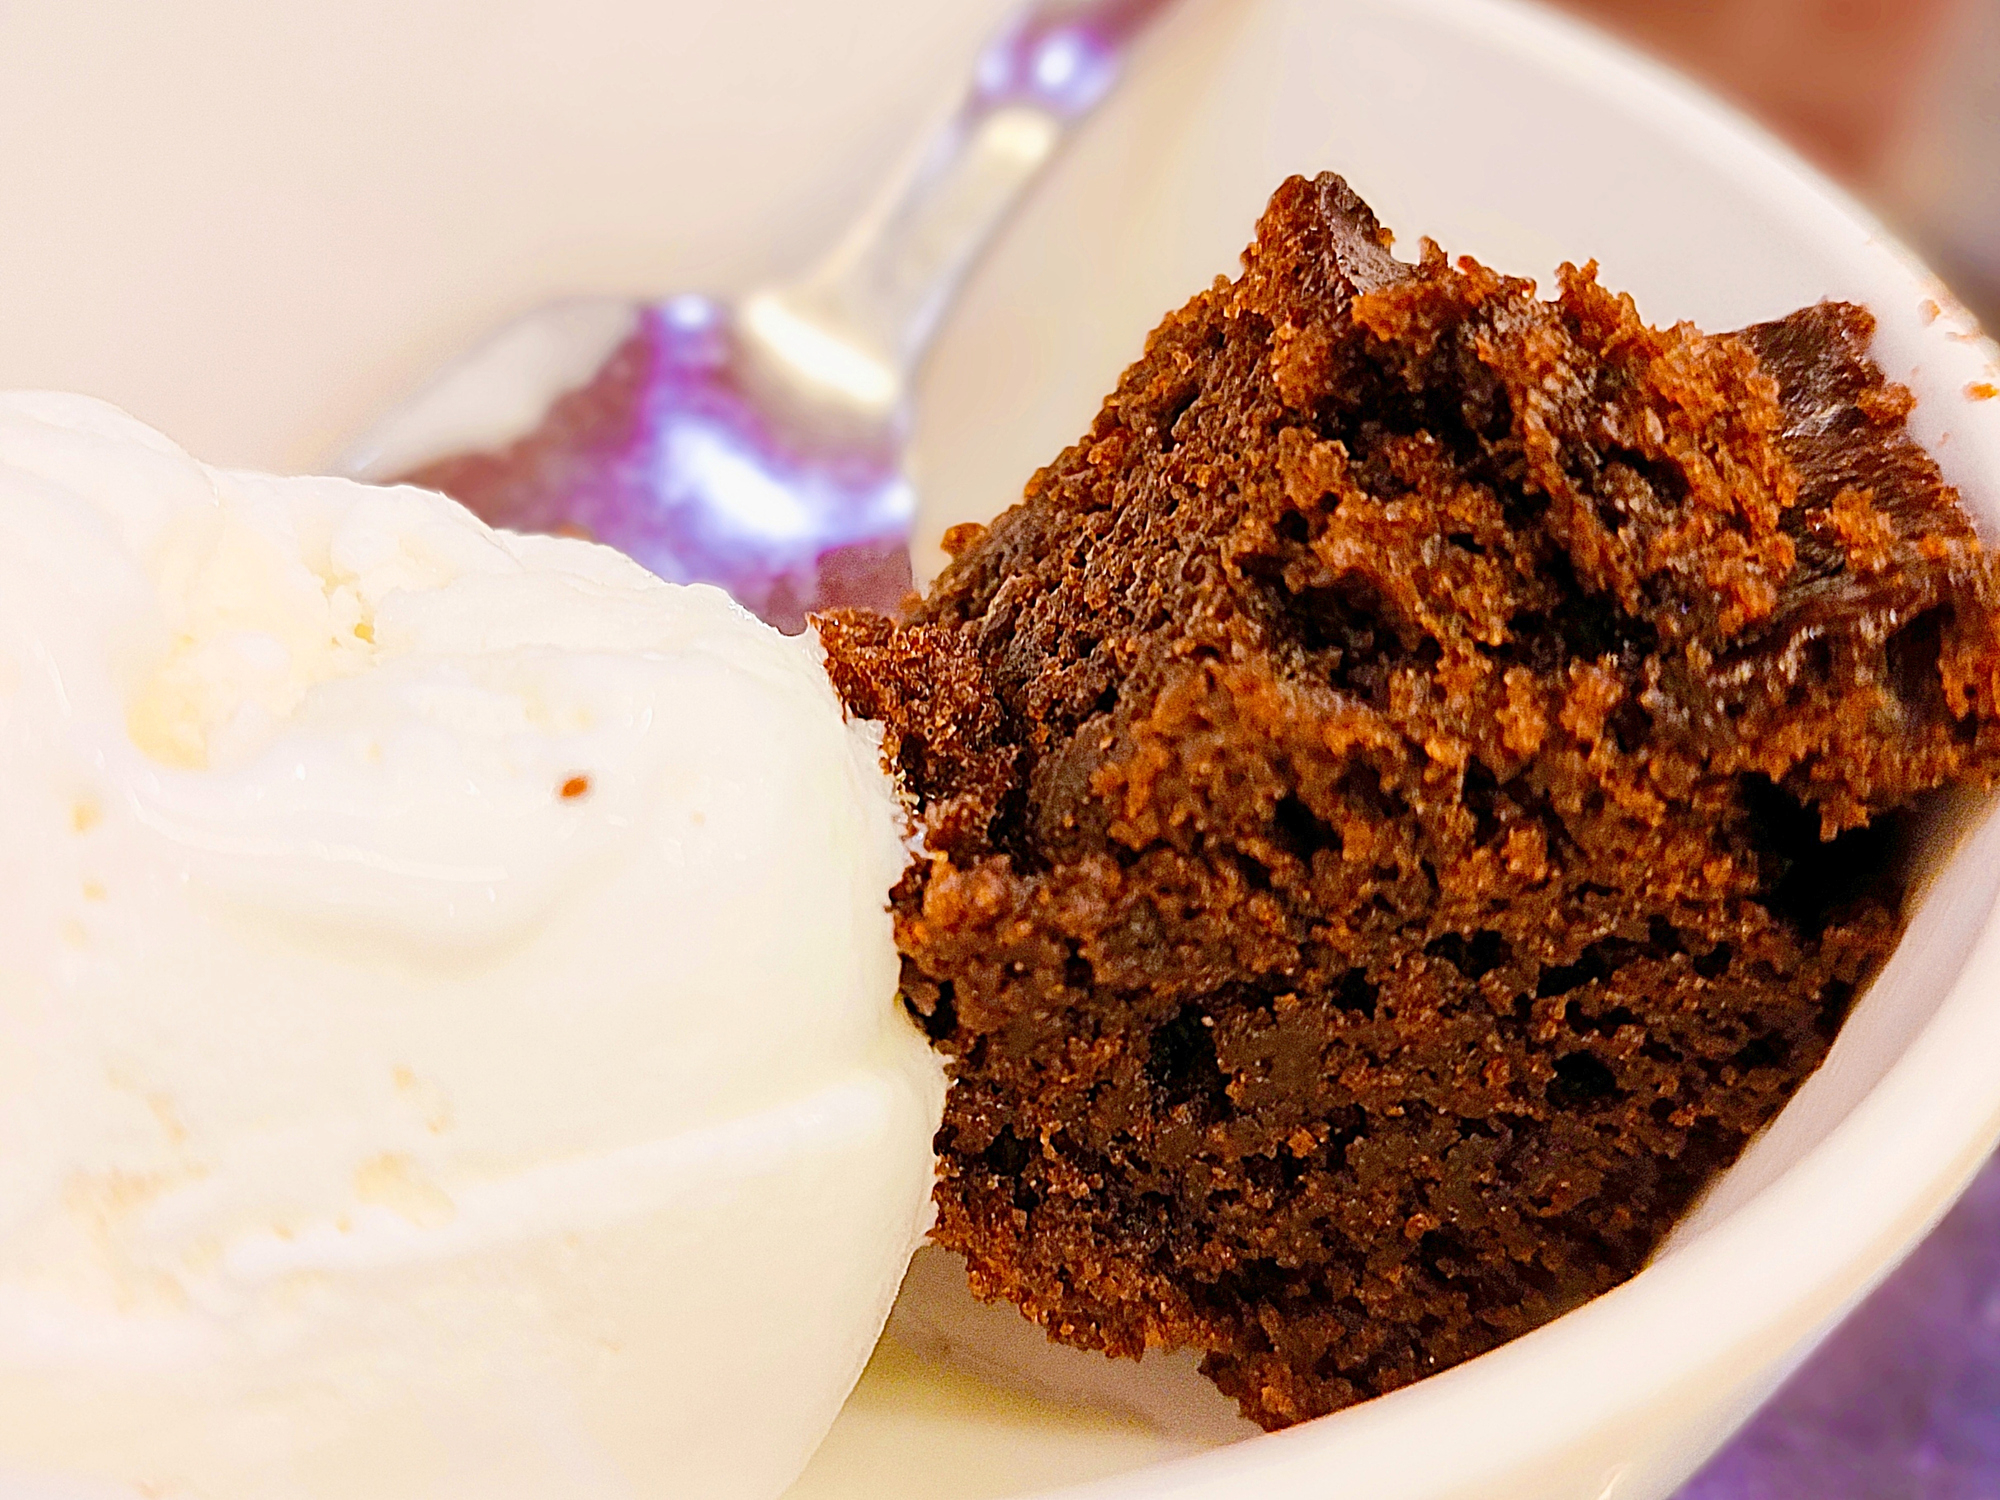 A close-up of chocolate cake with a scoop of vanilla ice cream on the side